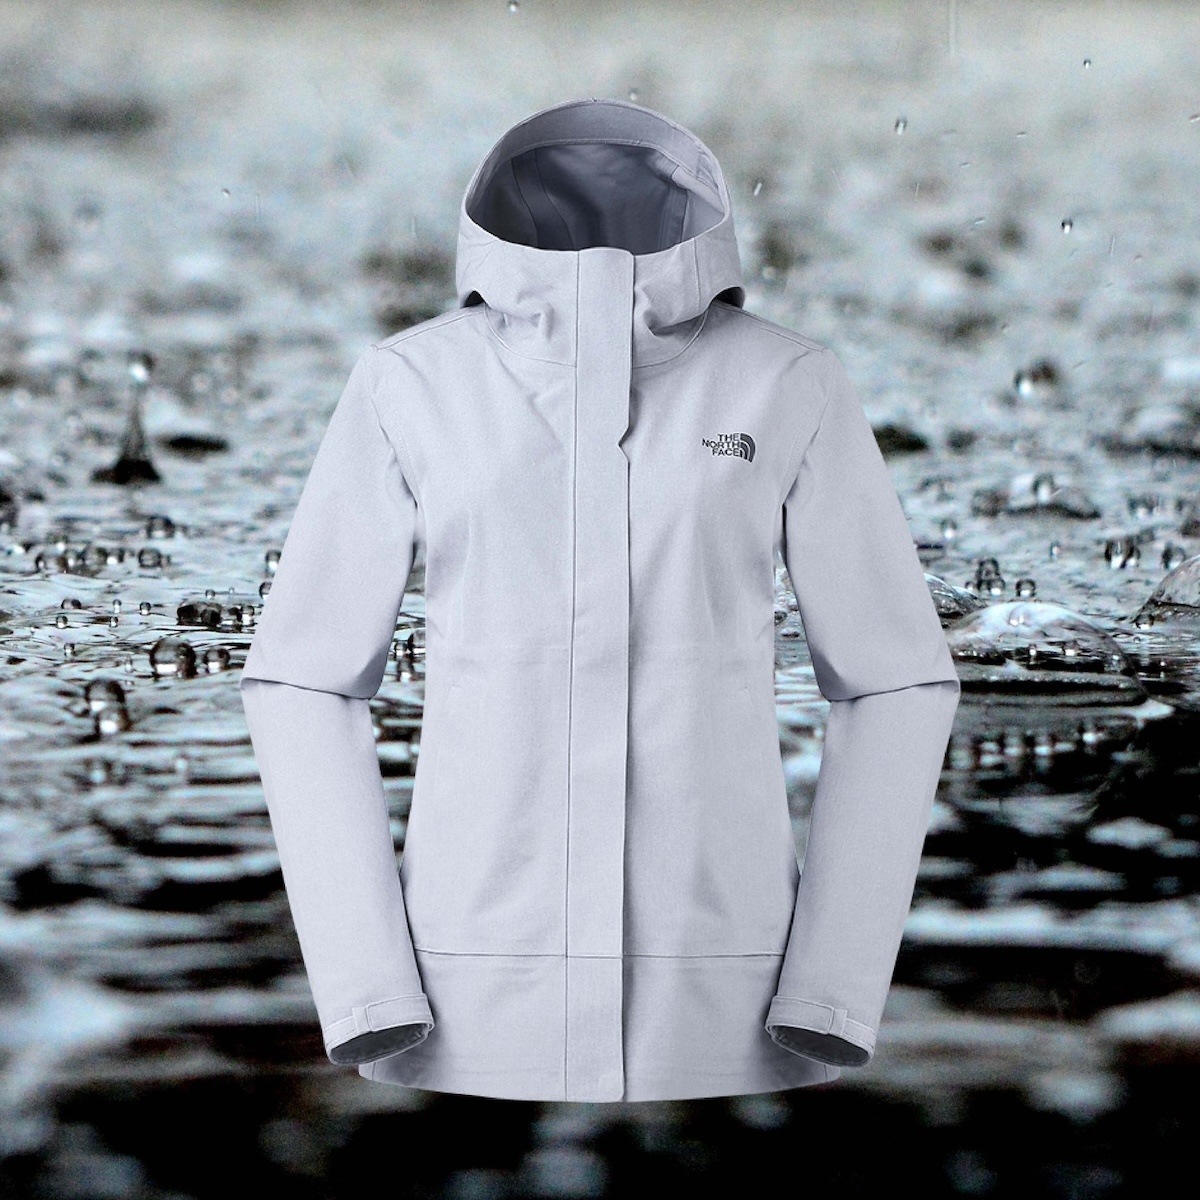 North Face Women’s Apex Flex Dryvent Jacket in light gray against a background of raindrops.